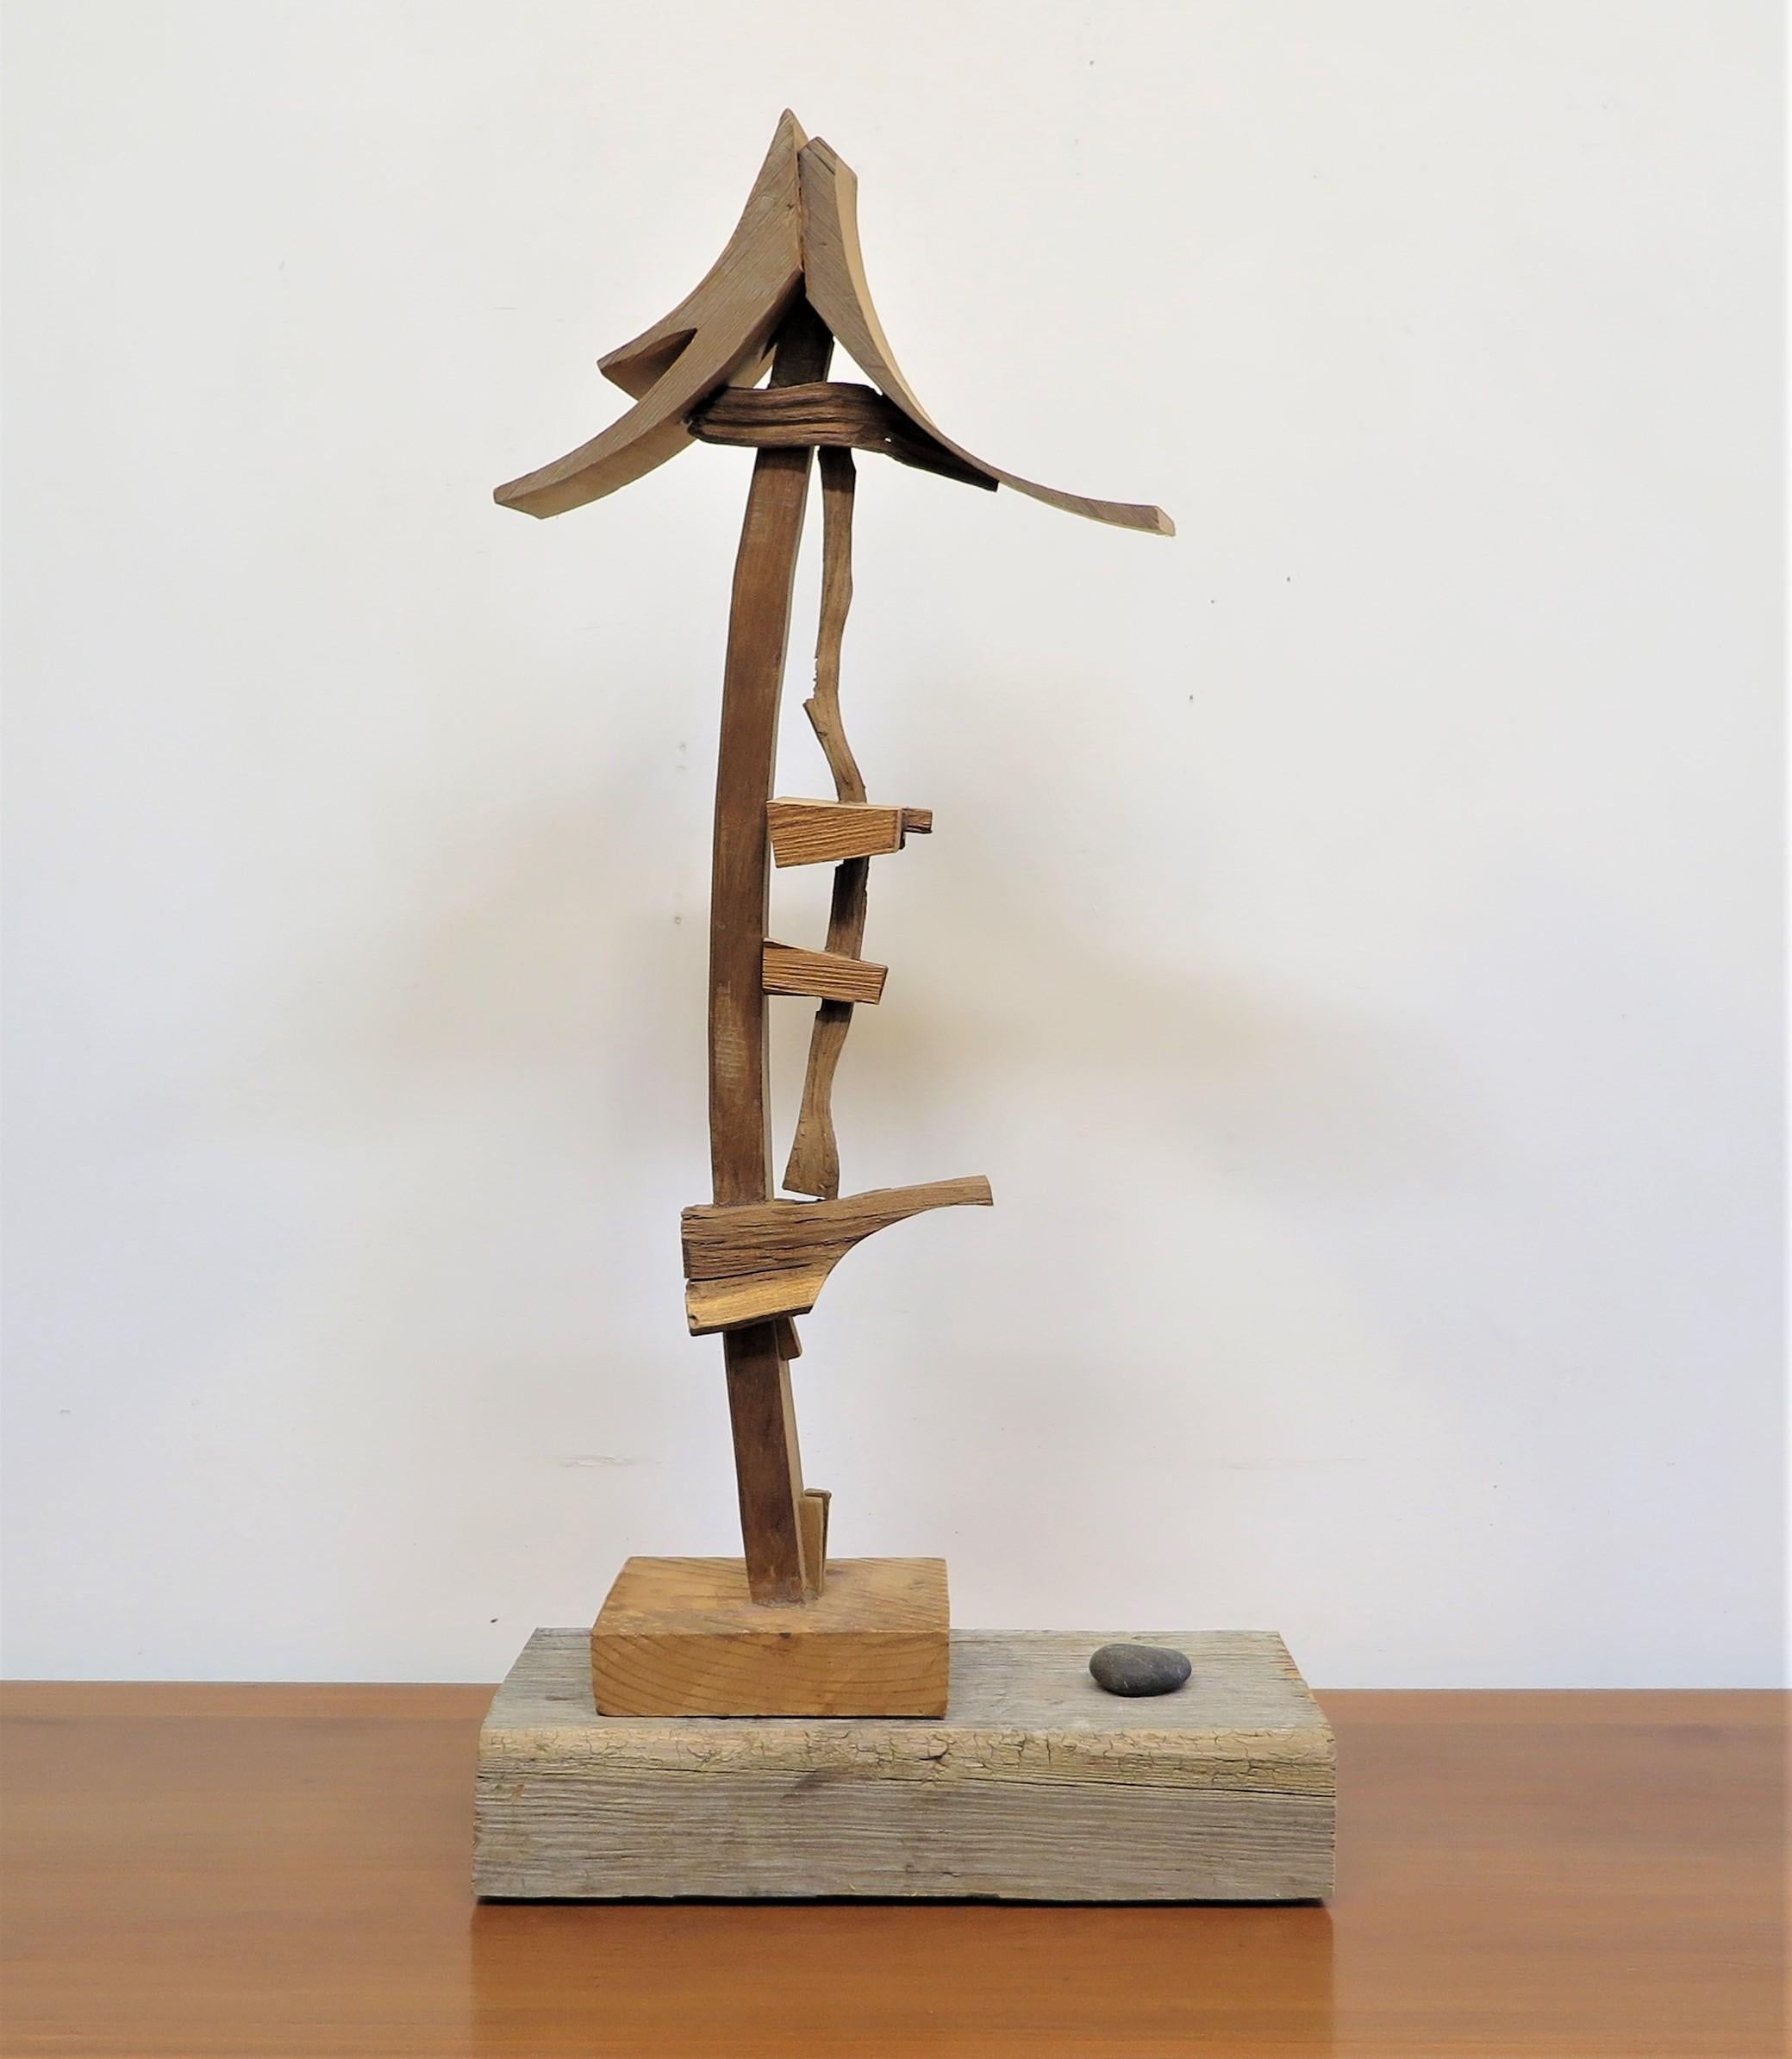 Abstract wooden sculpture by Artist Michael Ince born 1942. An early work 1970's of assembled cut crafted wooden pieces in his signature format. The delicate nature of his precise arrangement into composition is serene, peaceful, and compelling with